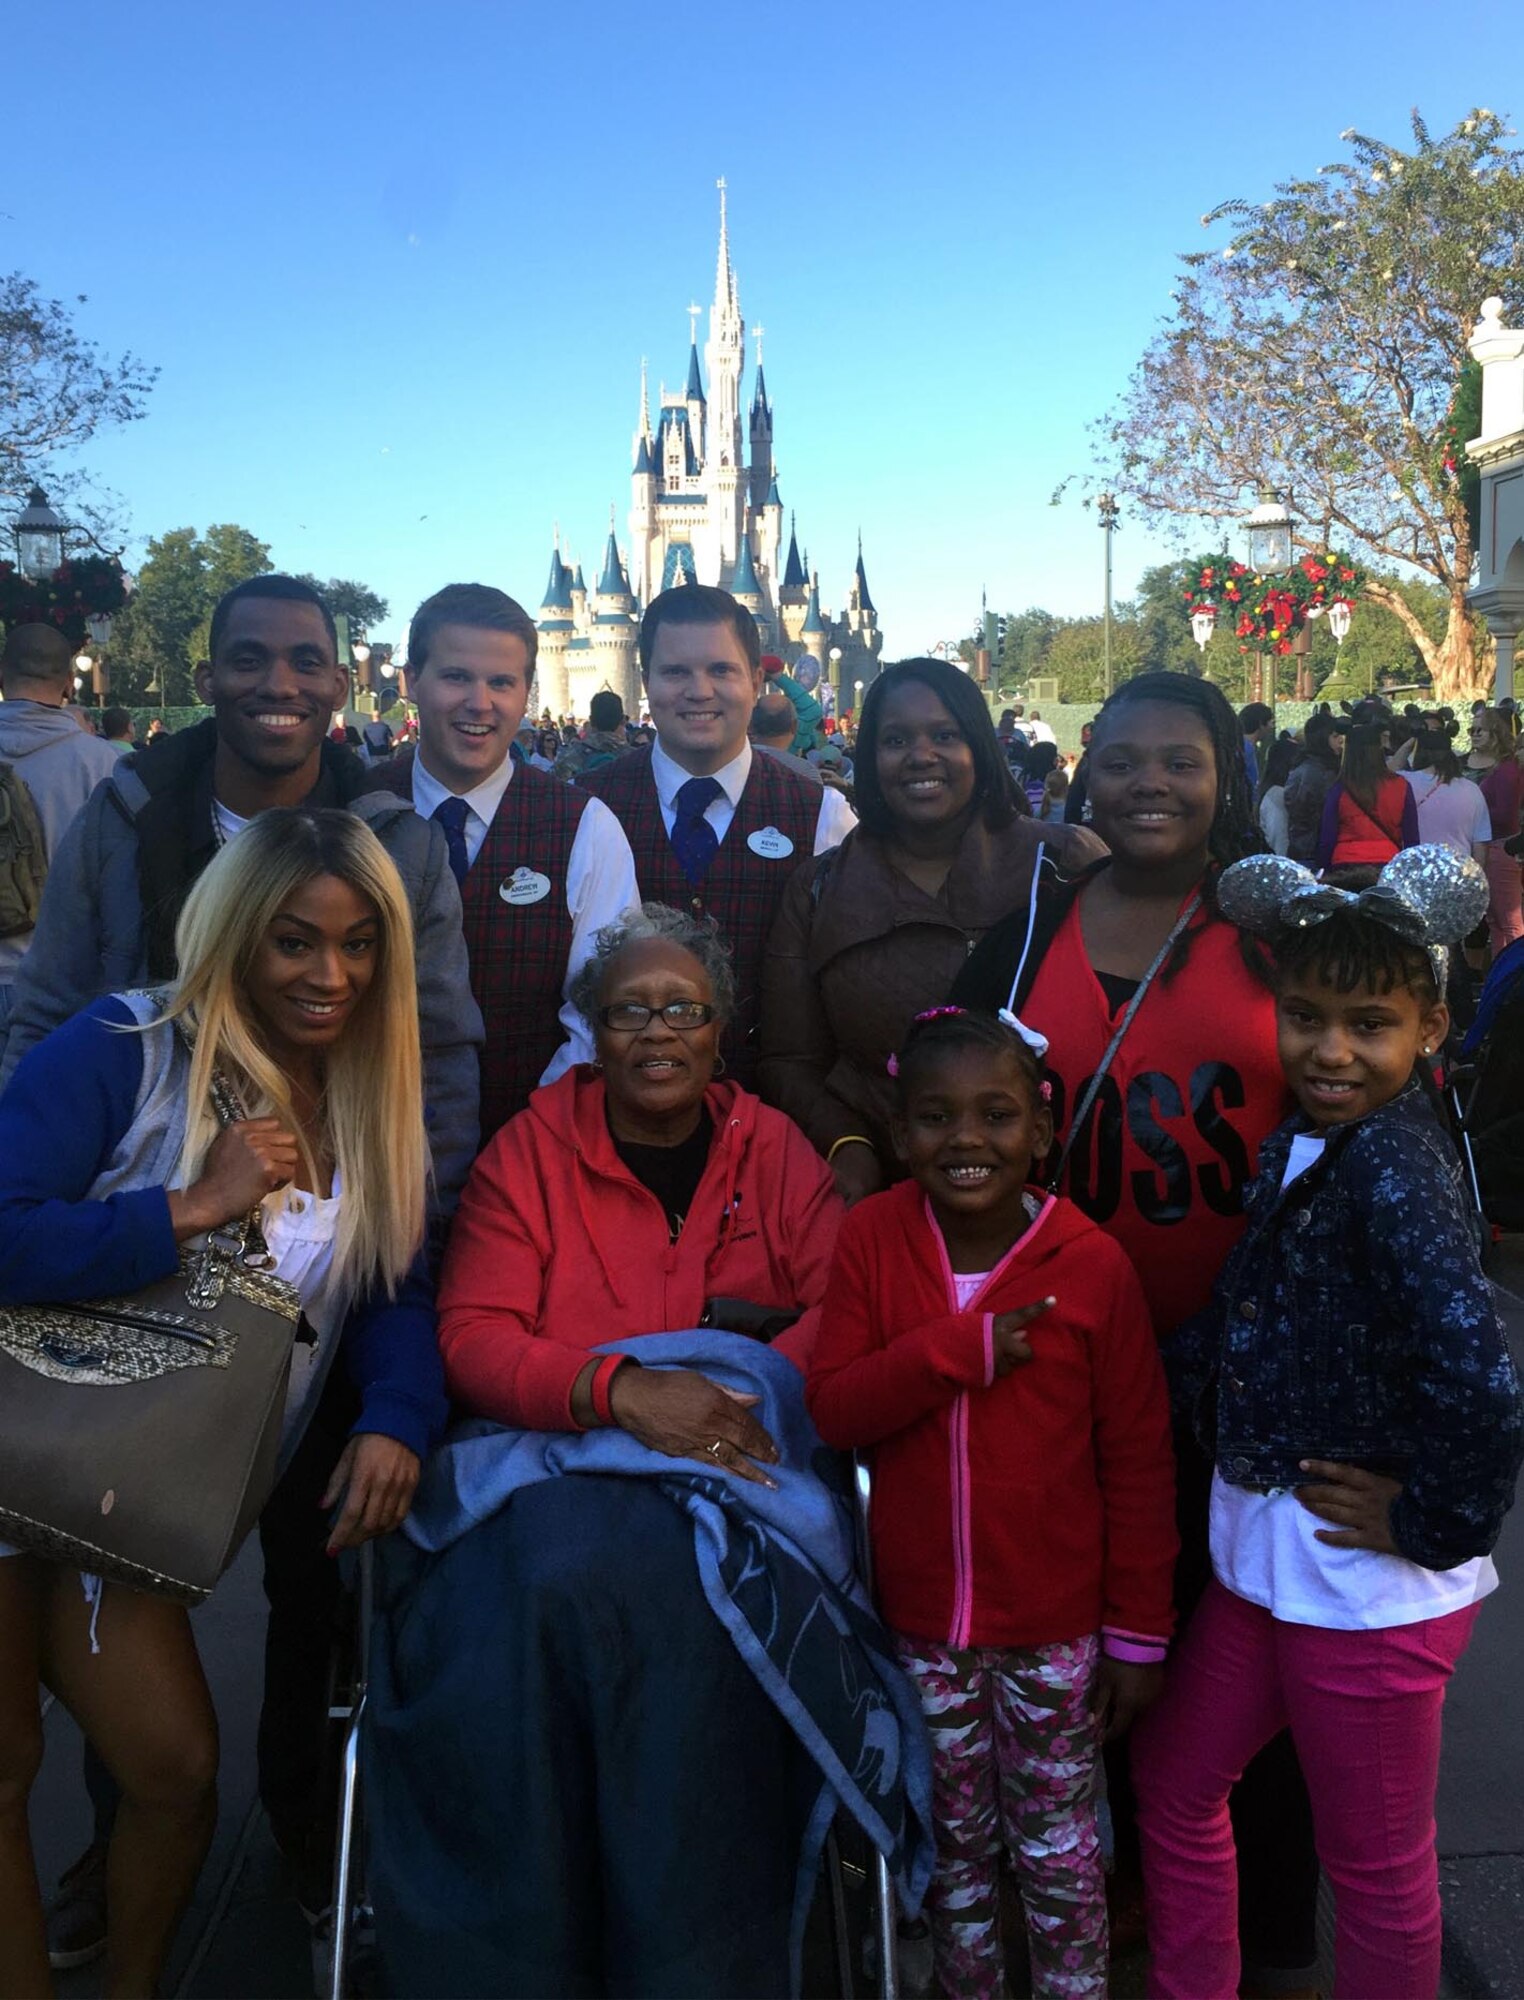 (Front row, second from left) Frenzella Bolden, 22nd Force Support Squadron child development center program assistant, poses with her family member and Disney employees, Dec. 10, 2014, at Walt Disney World in Orlando, Fla. Bolden was chosen by ABC to be highlighted as an outstanding caregiver after adopting and raising six children and working at the McConnell Air Force Base, Kan. child development center for over seven years. (Courtesy photo)